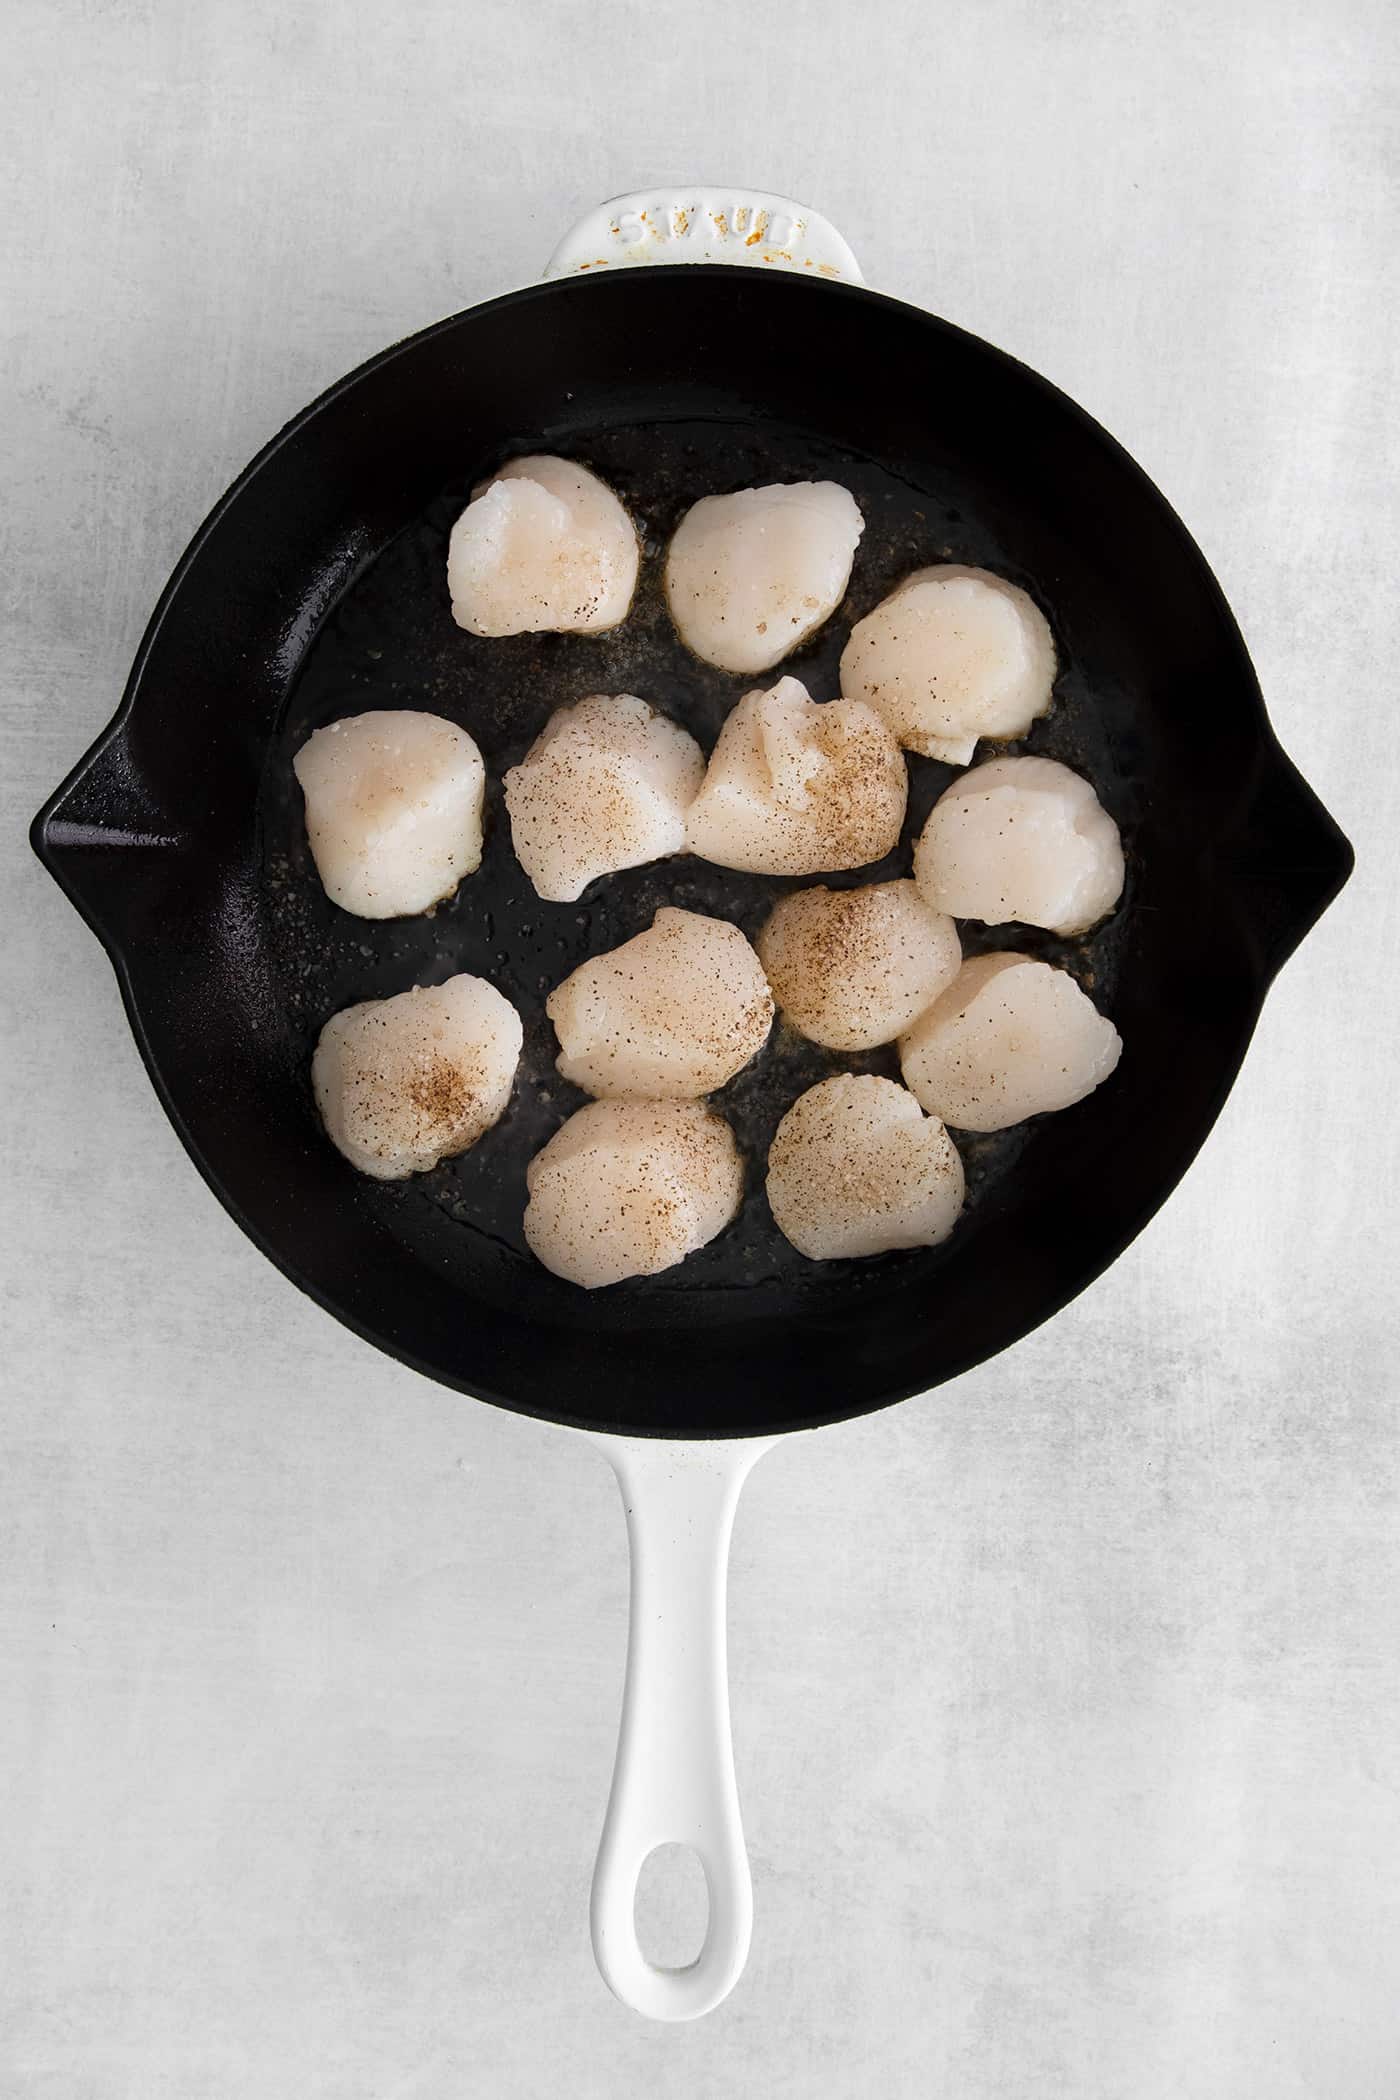 Sea scallops cooking in a skillet